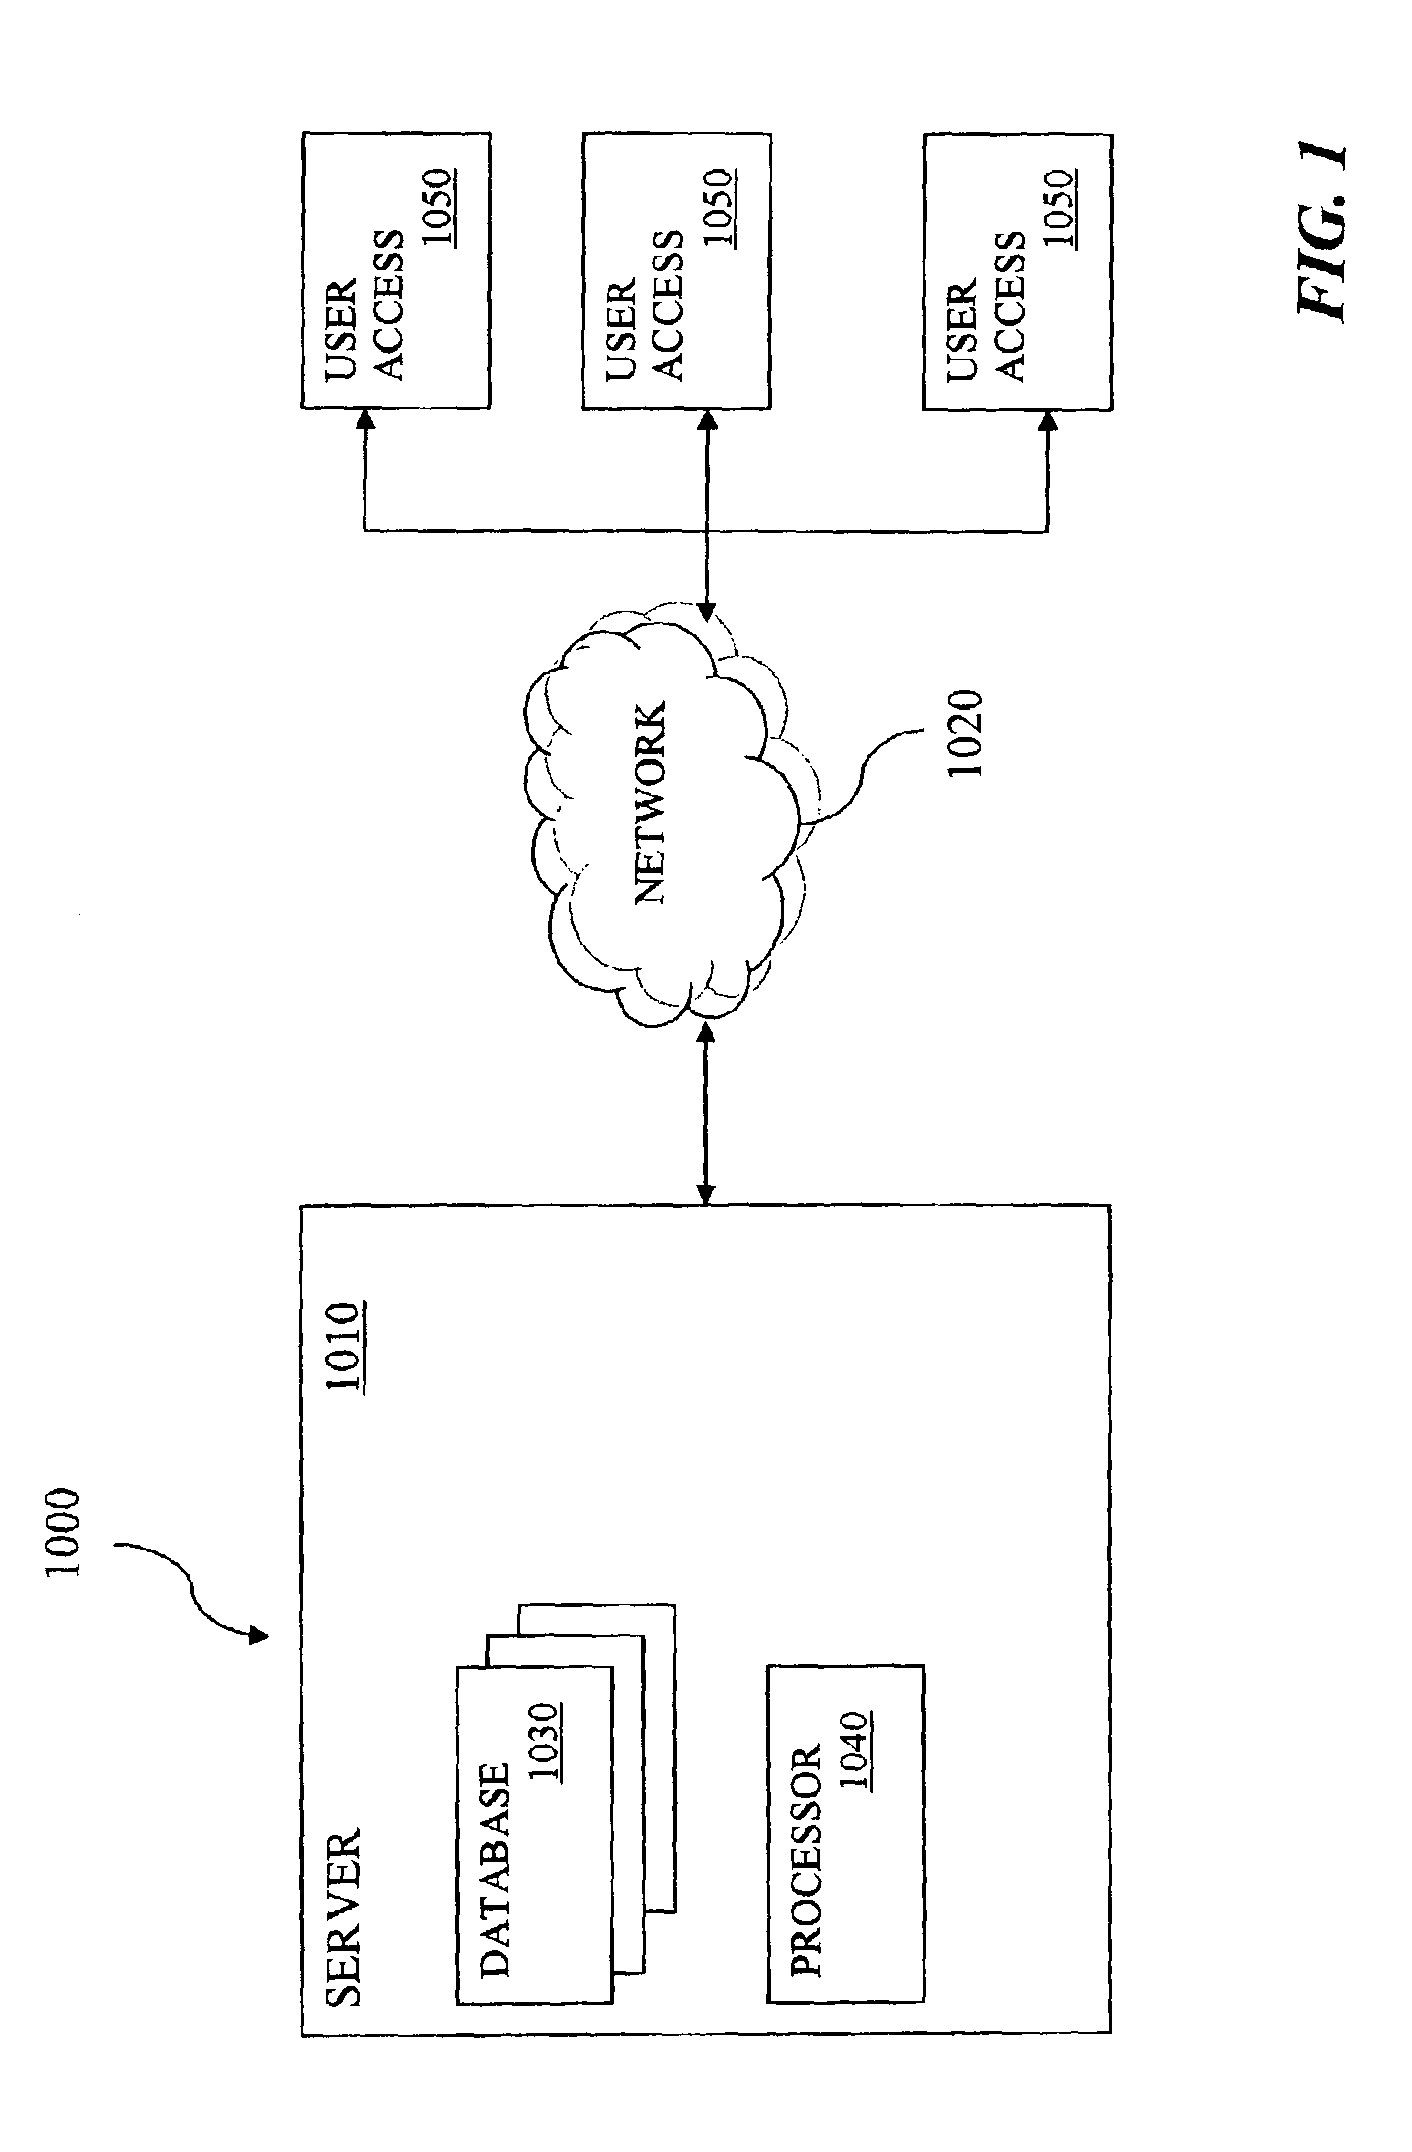 System and method for monitoring weight and nutrition